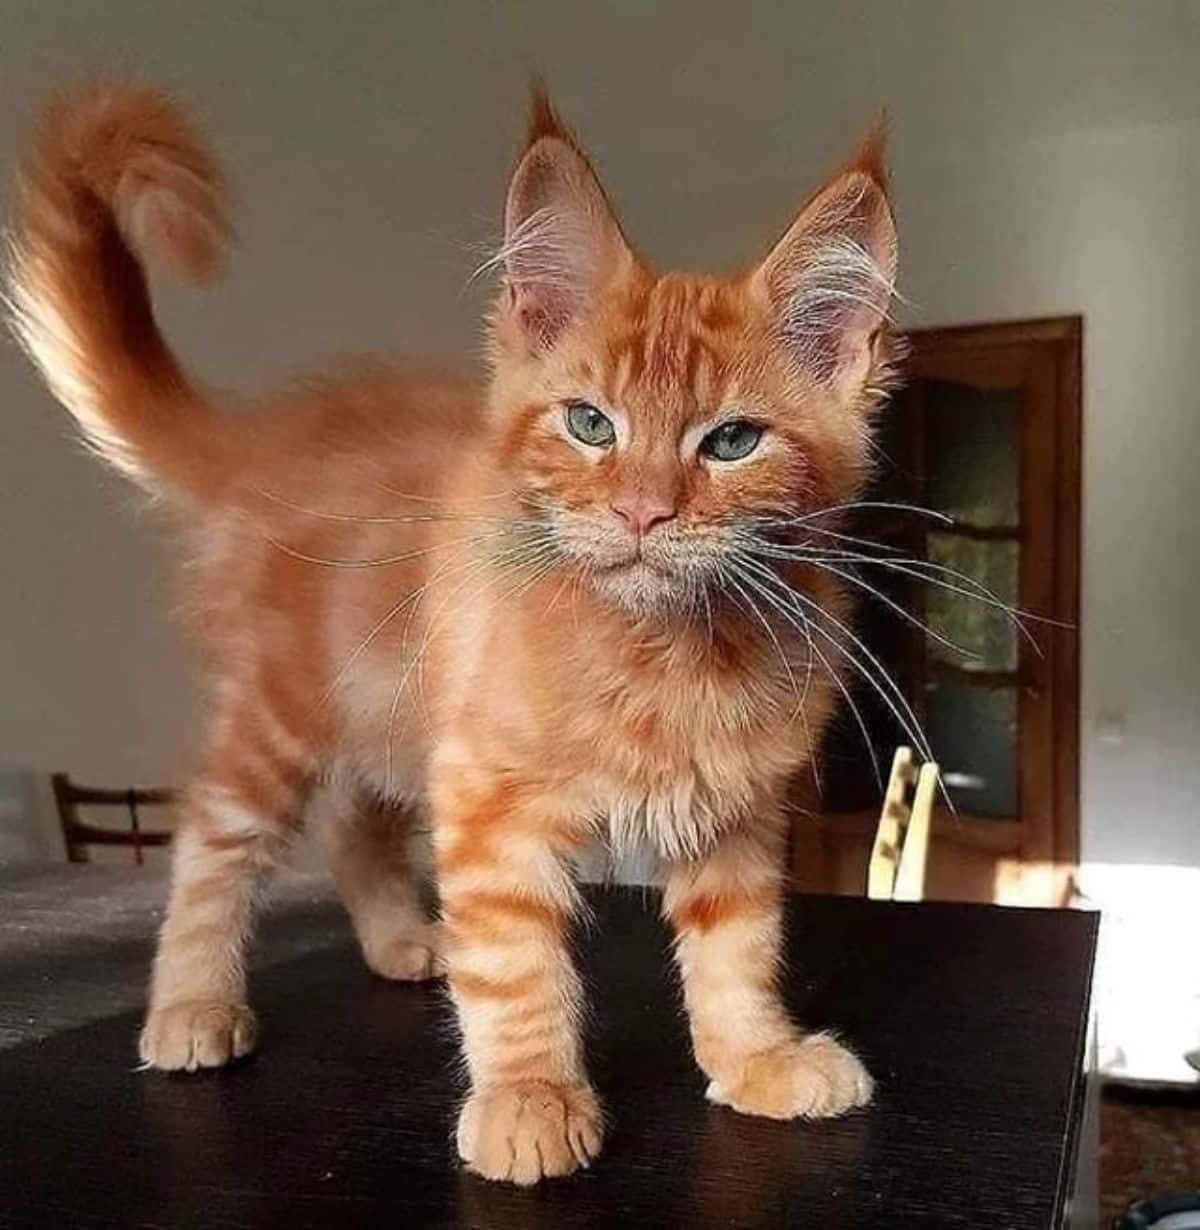 A young ginger maine coon standing on a black dining table.